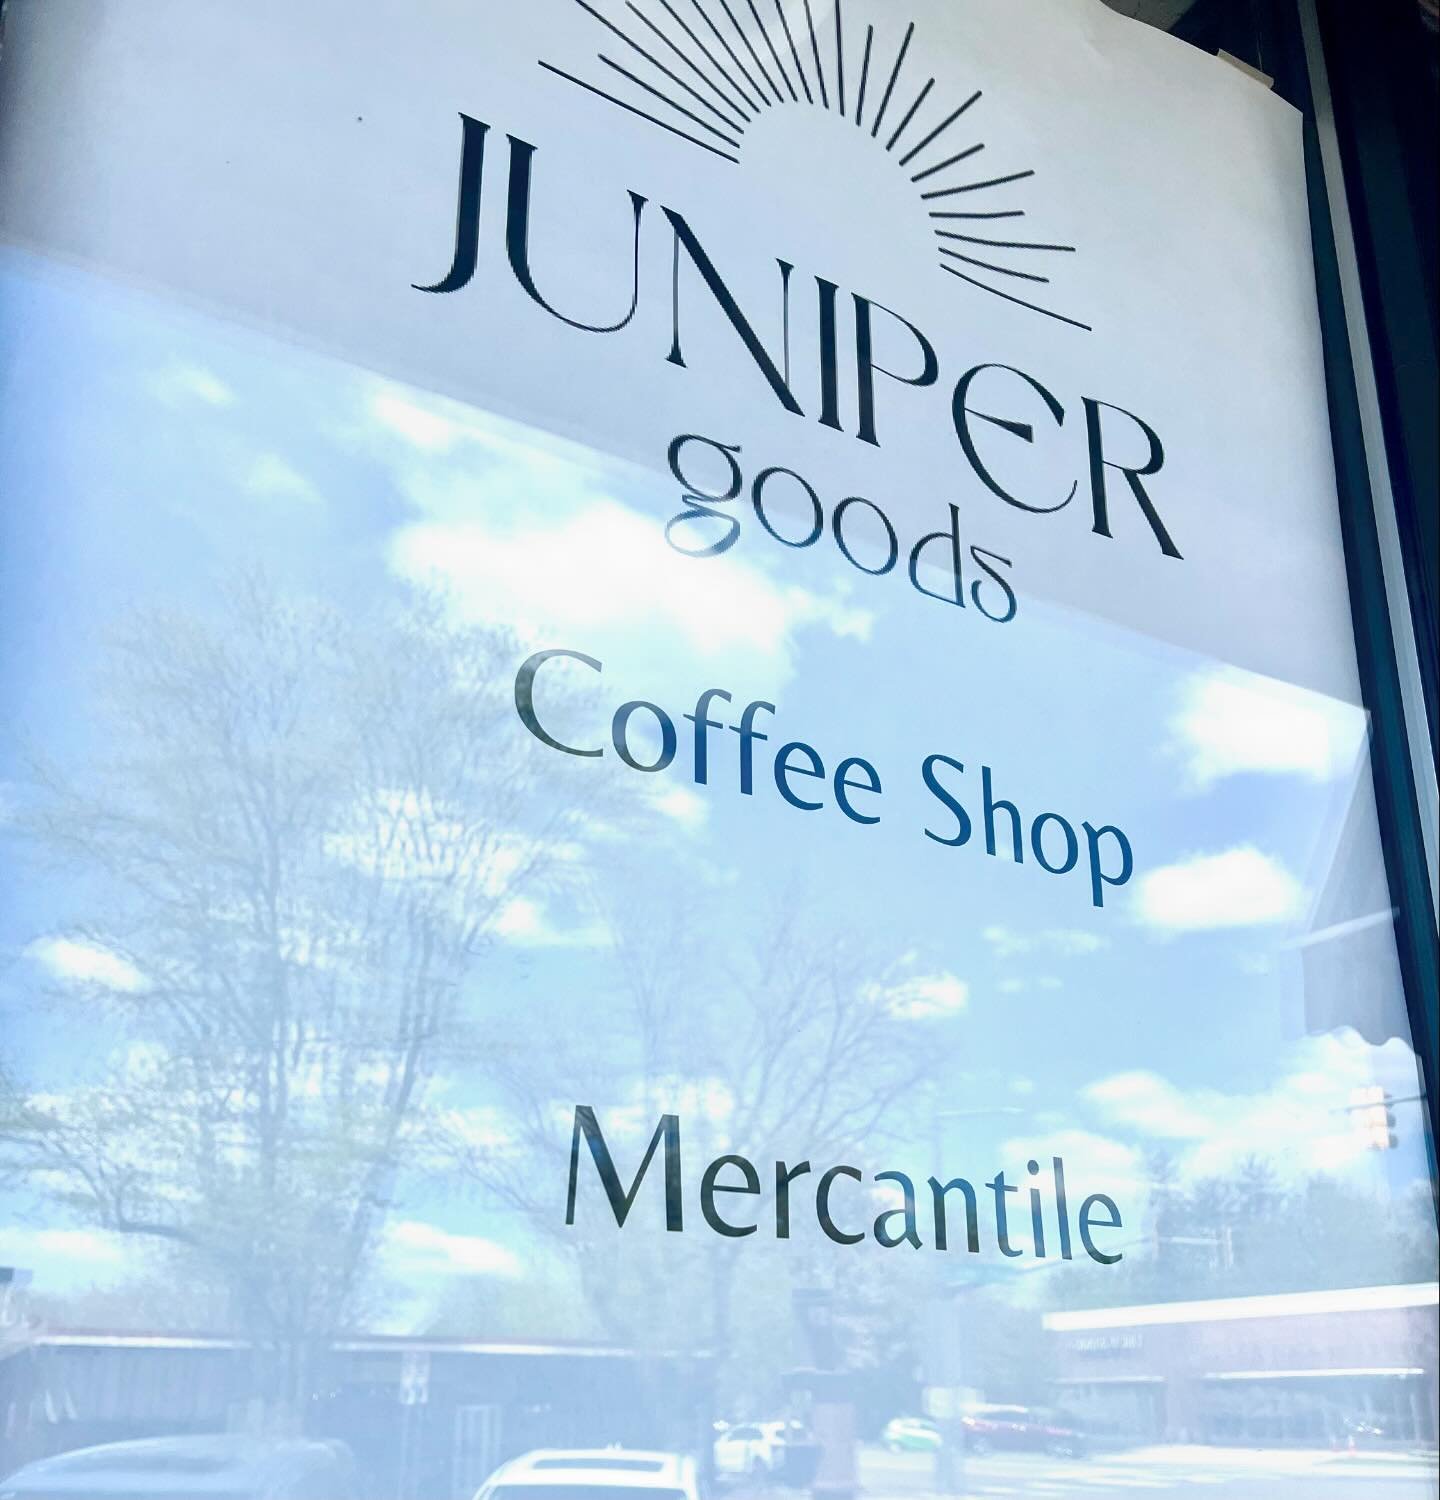 This building was an outdated, dreary office when I bought it. Soon it will be a vibrant coffee/wine bar with a small retail space. Attracting businesses that encourage people to walk helps the economic vitality of downtown. 

I know Juniper Goods wi